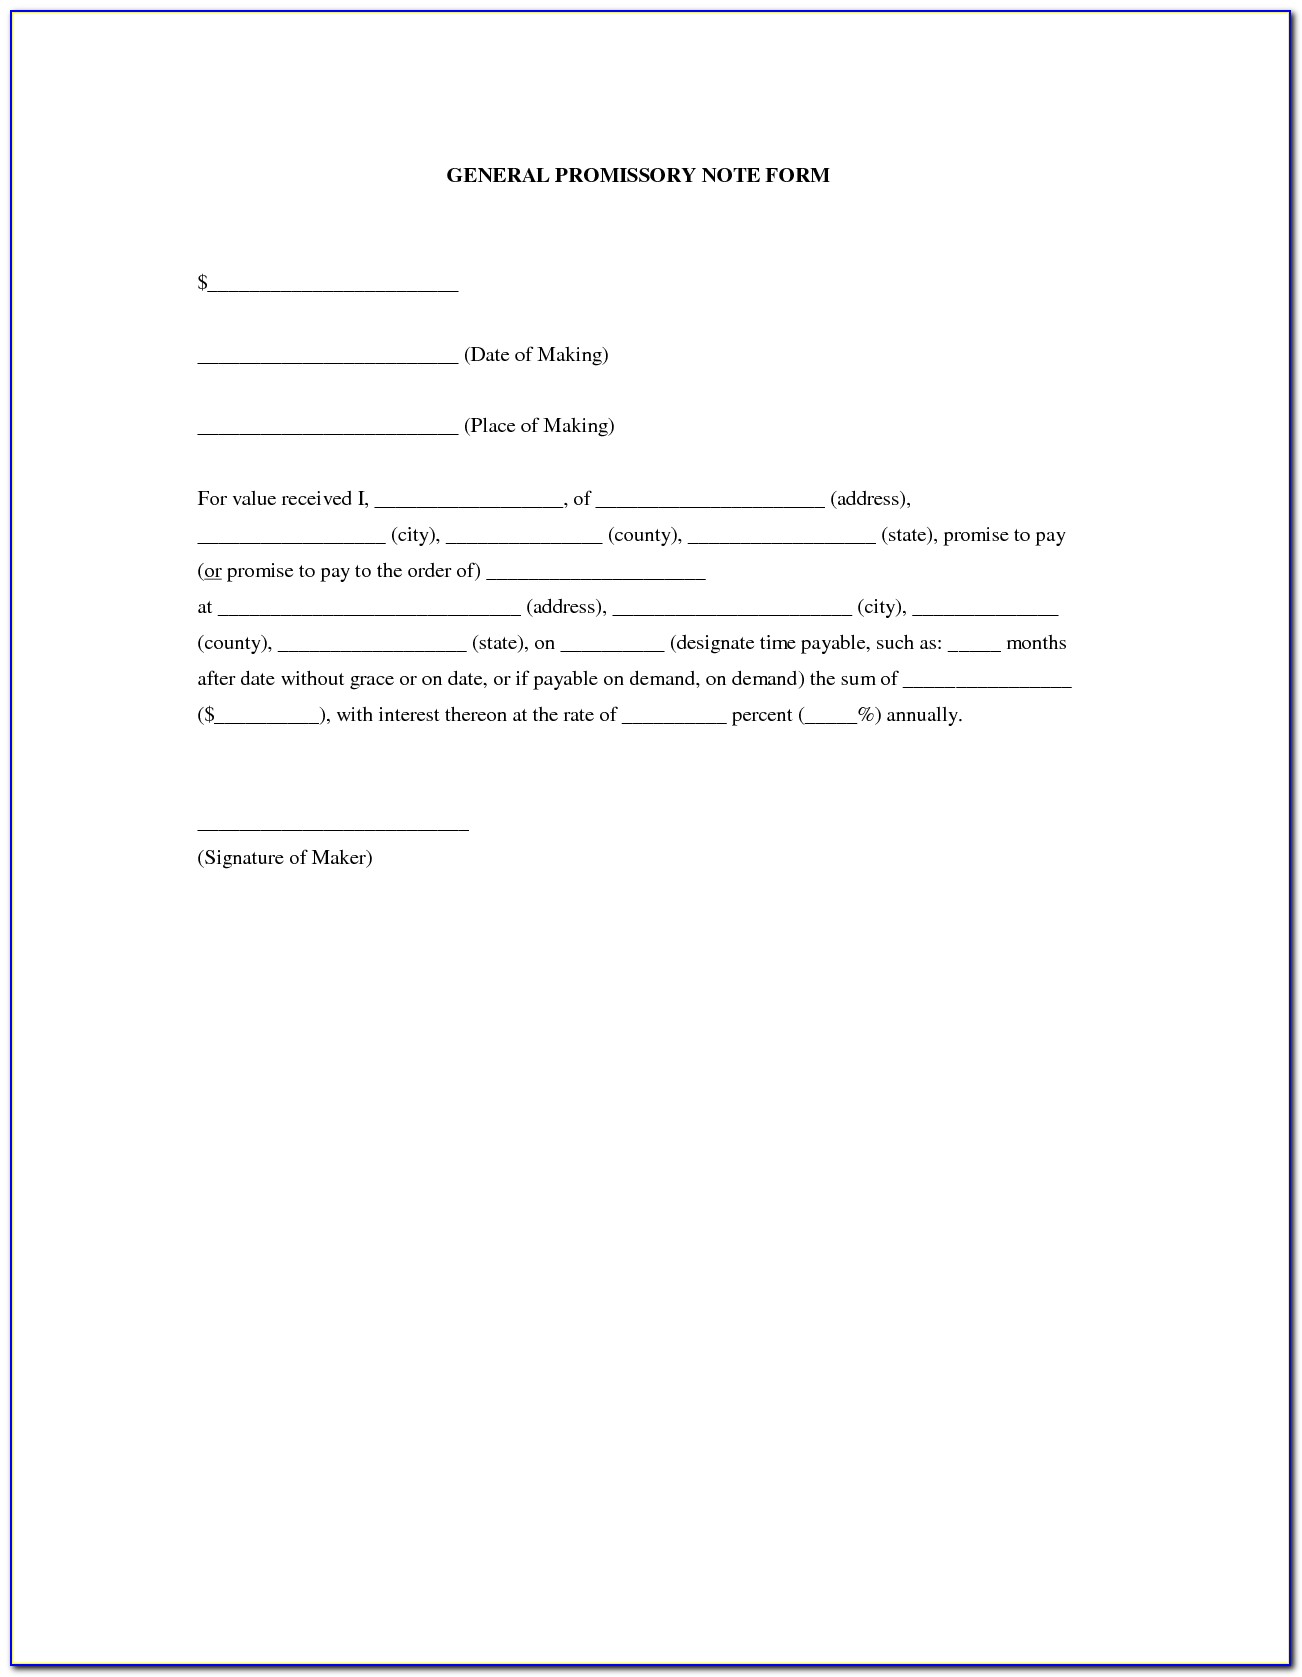 Example Of Promissory Note For Personal Loan